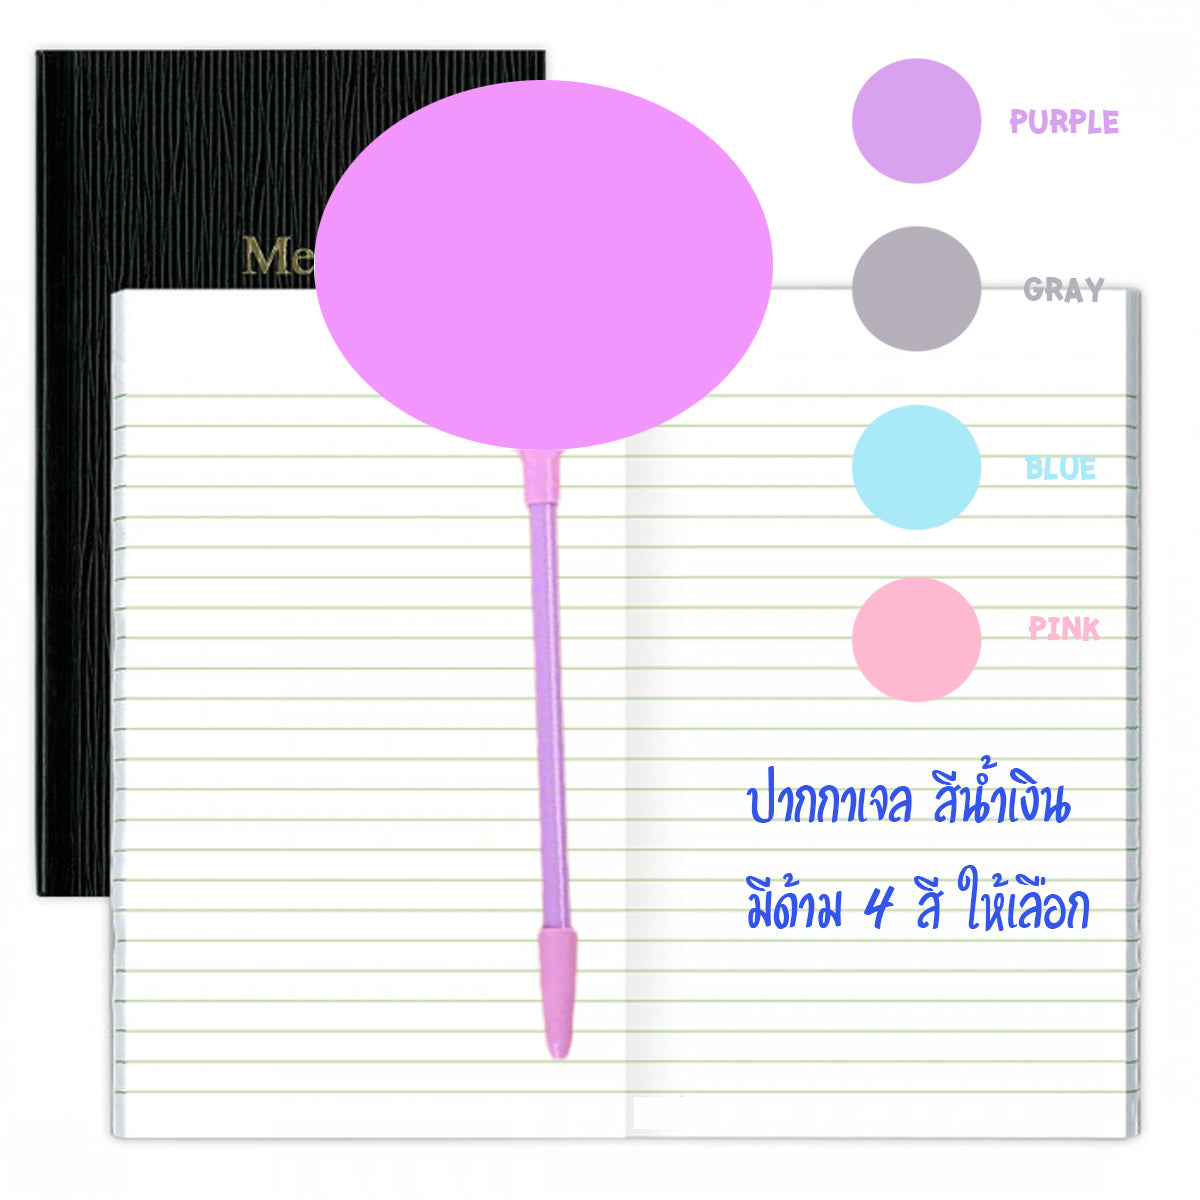 Personalised Oval Pen Blue Ink Color Accessories Custom Photo - HANDLE PURPLE